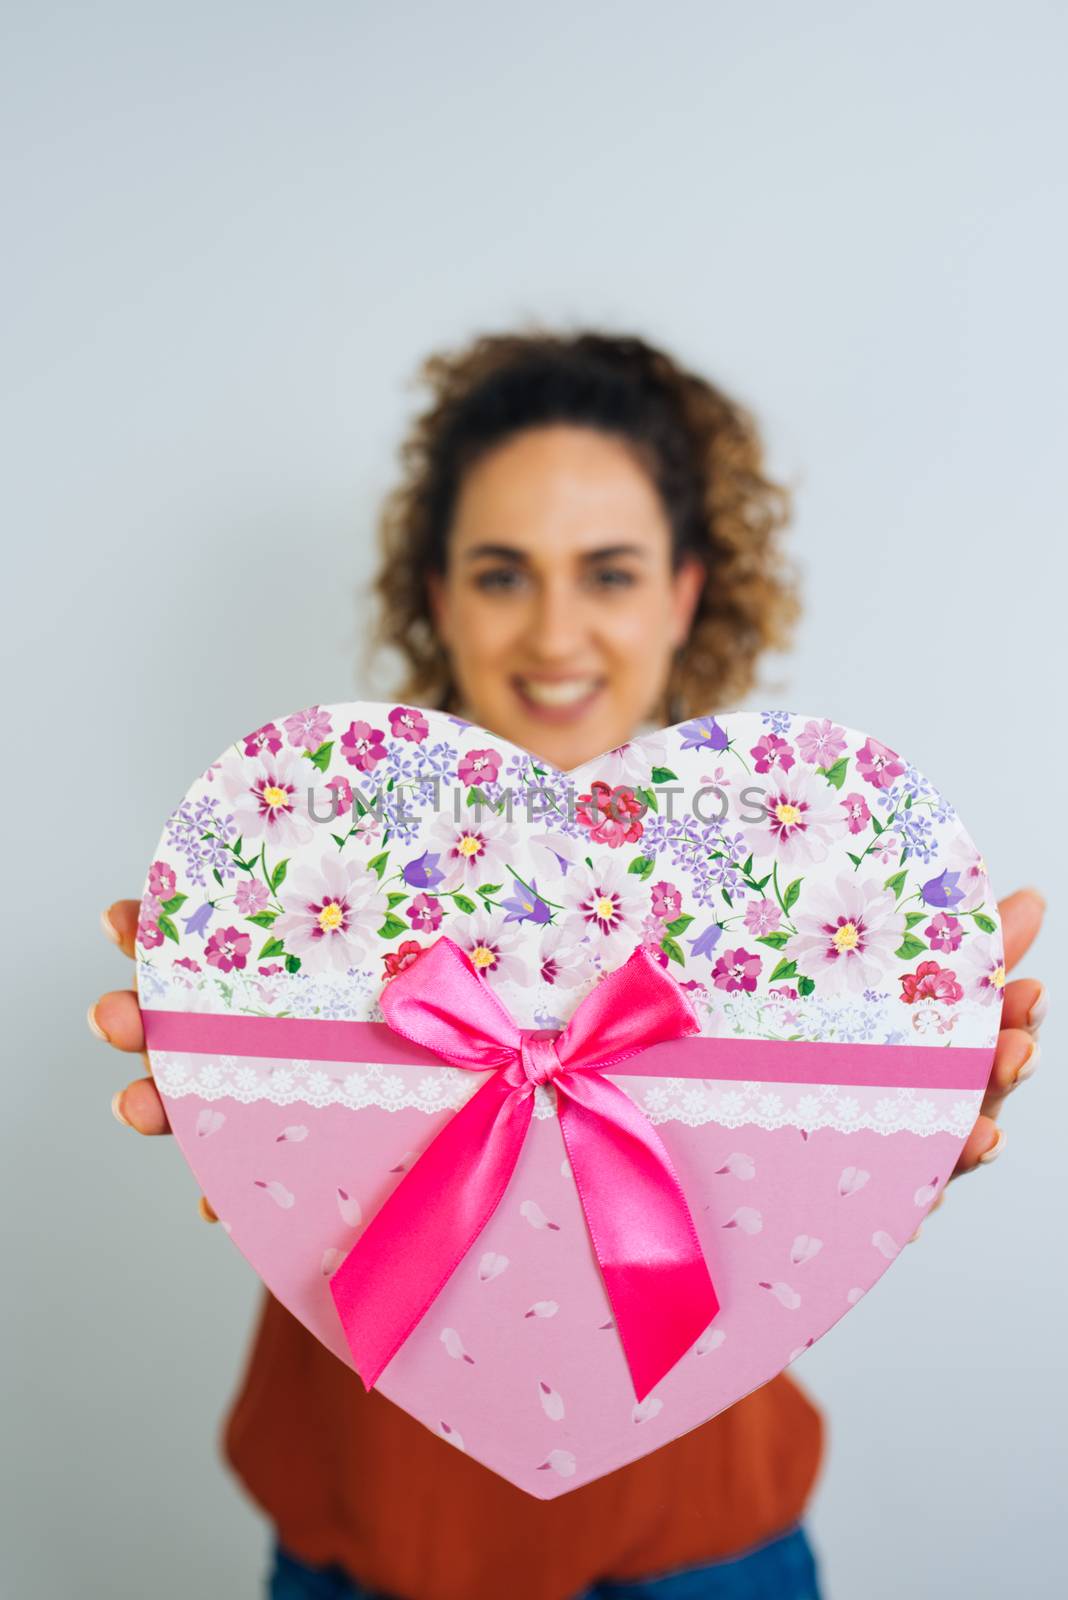 Attractive Curly Long Haired Woman Is Holding A Heart Shaped Box With Ribbon Isolated On White Background